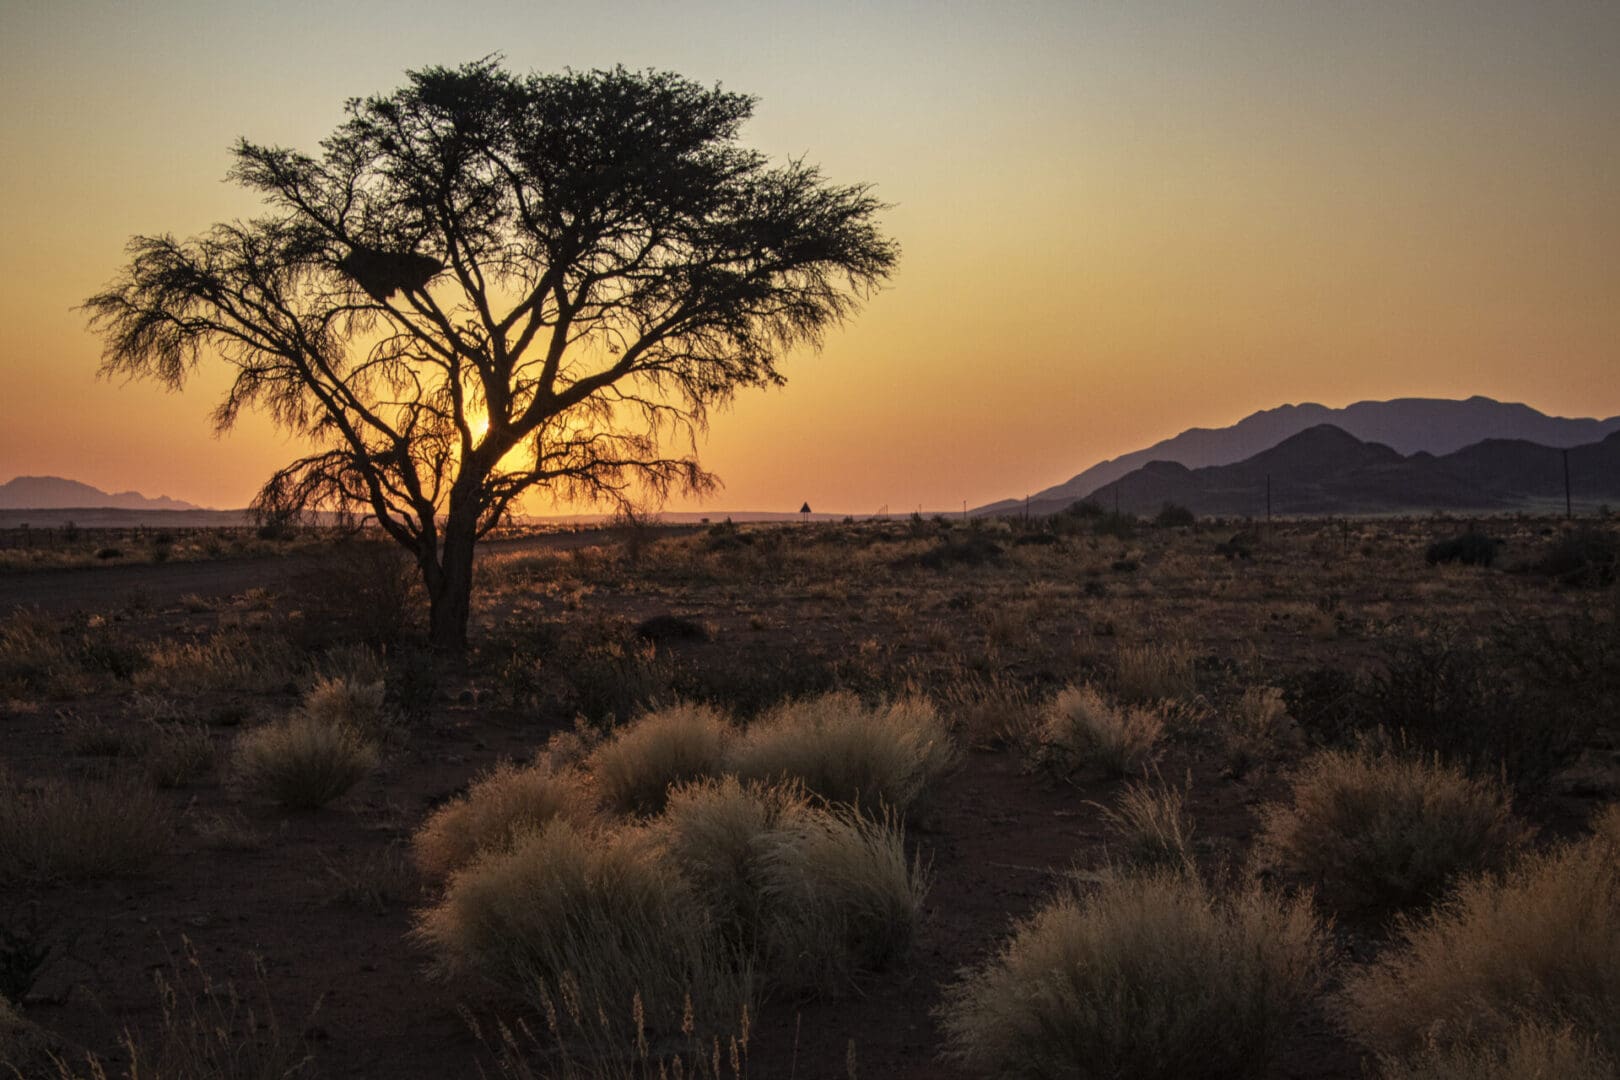 A lone tree in the desert.